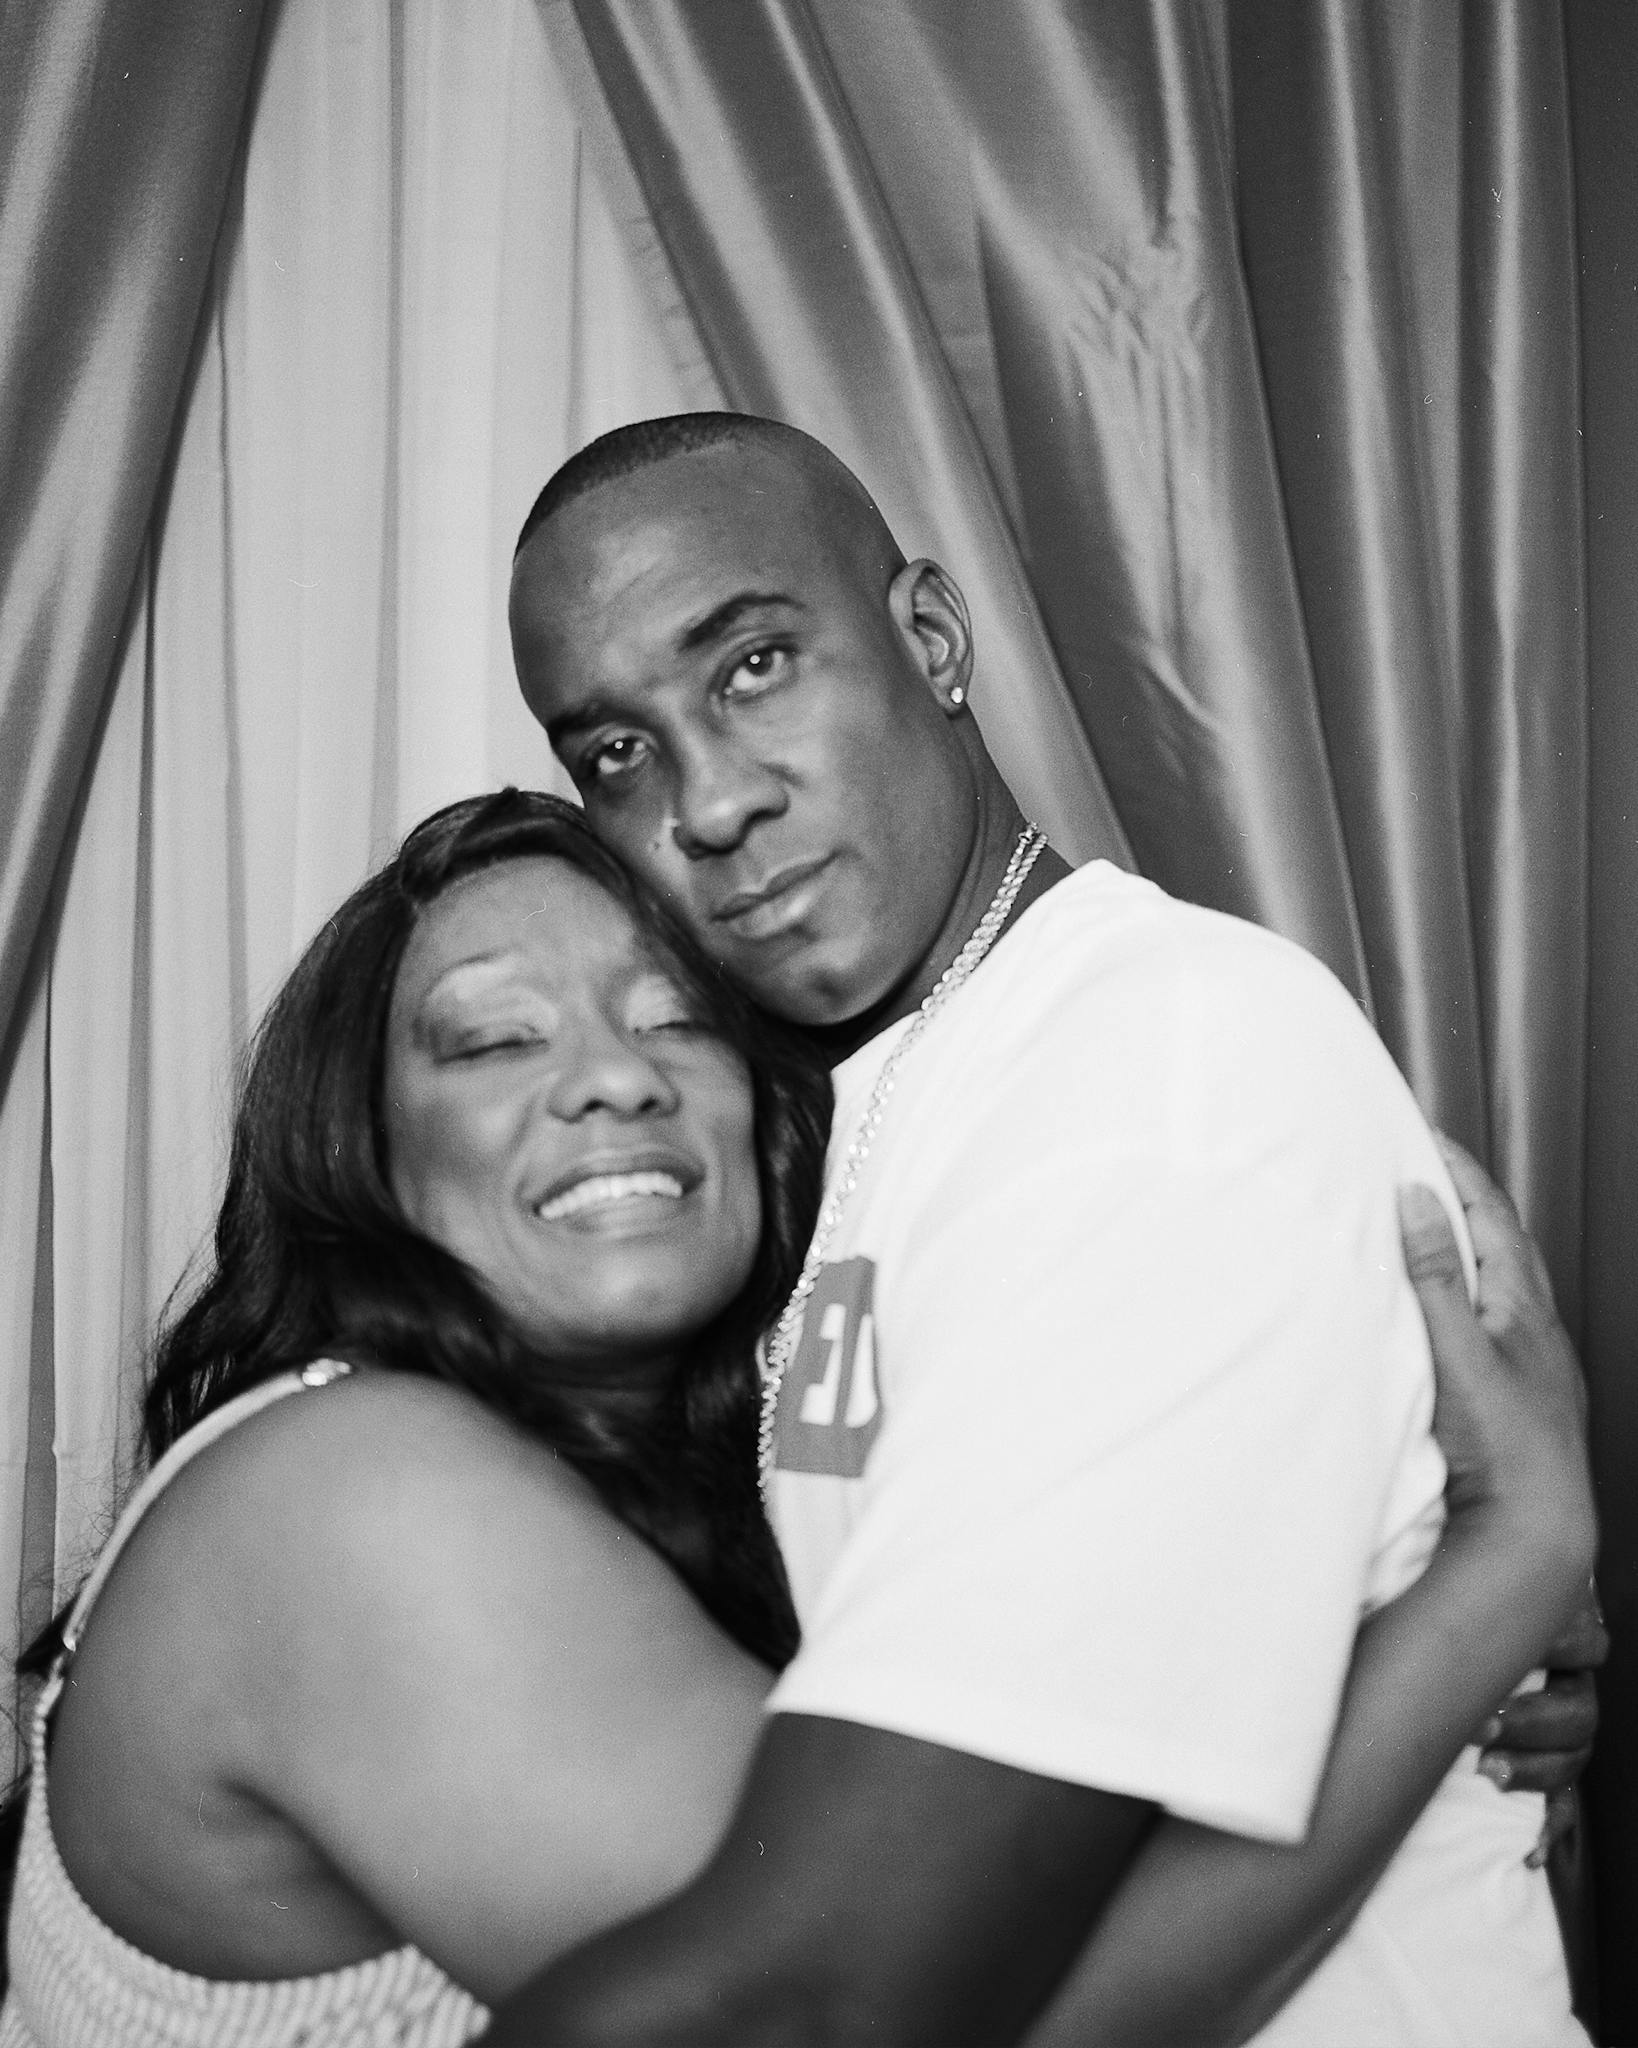 Lydell Grant with his mom Donna Poe at their Houston home on September 1, 2020.